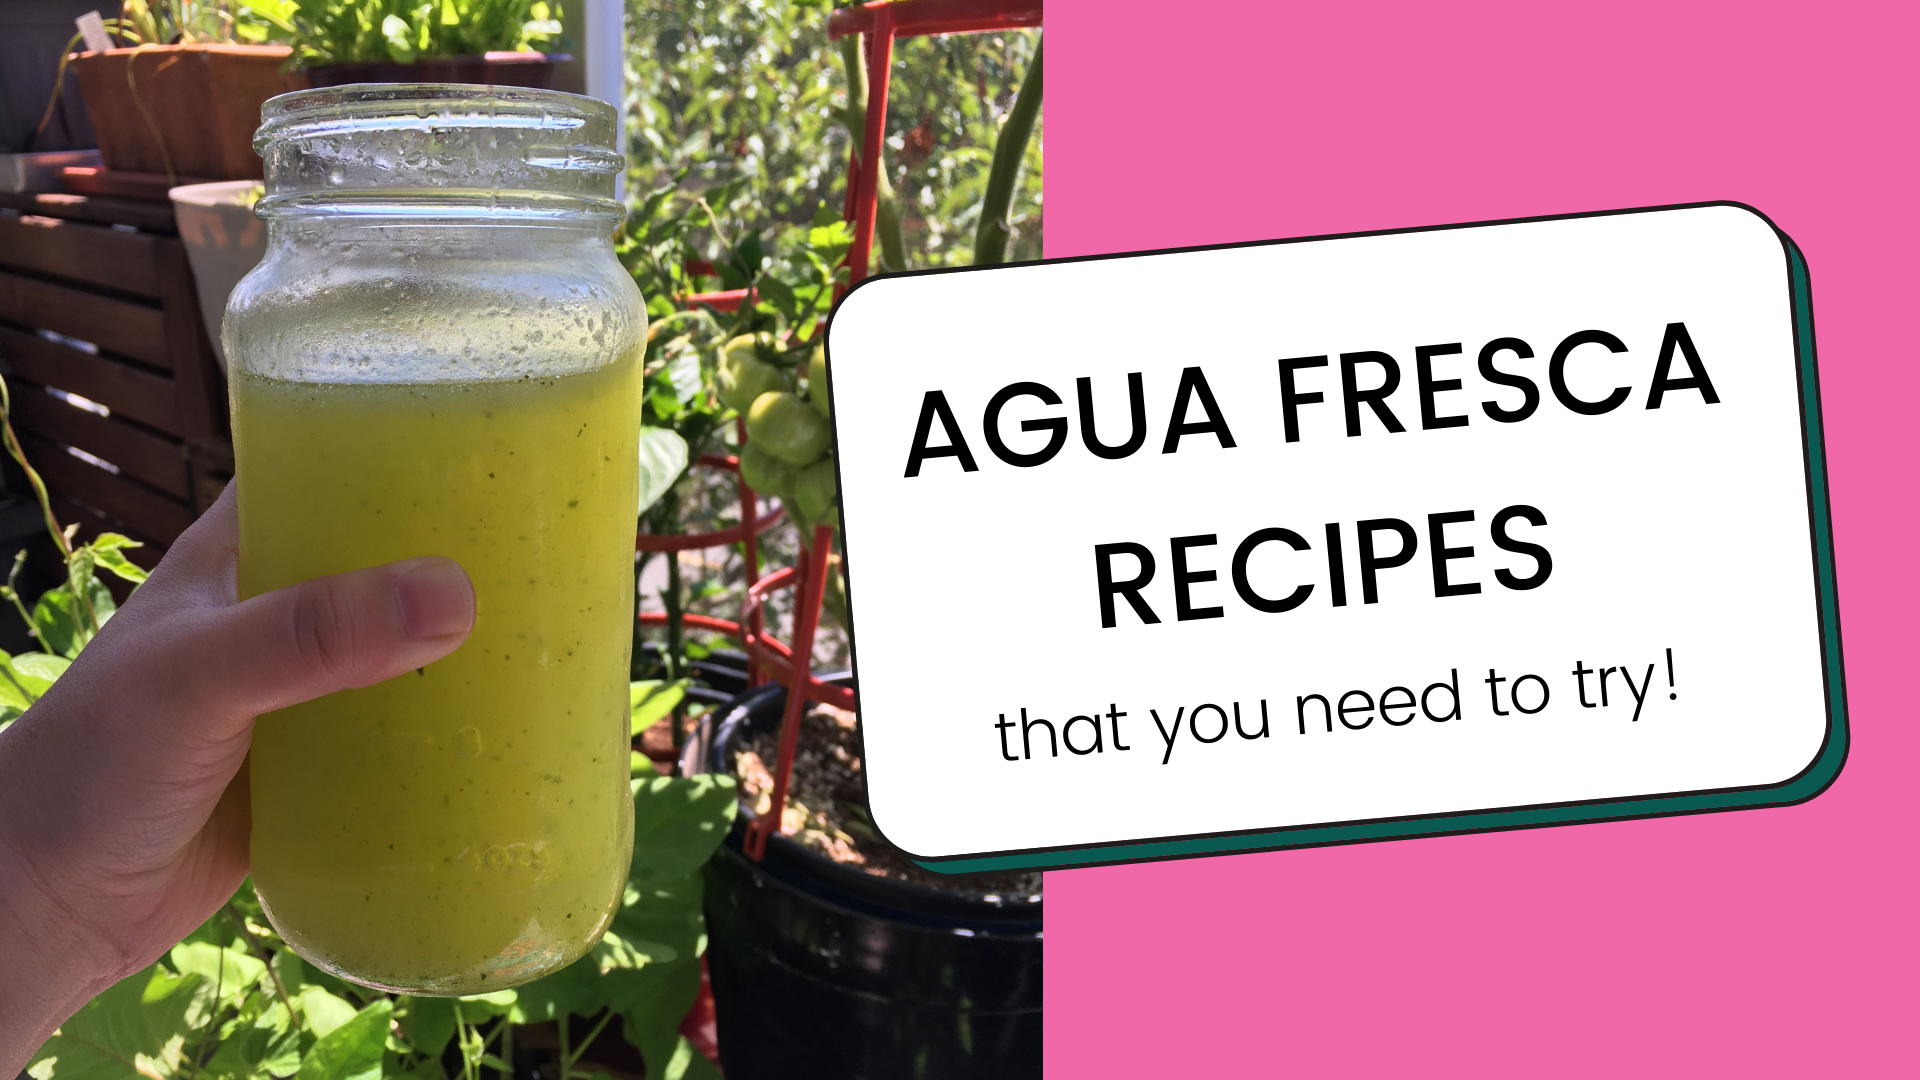 Agua Fresca Recipes that You Need to Try